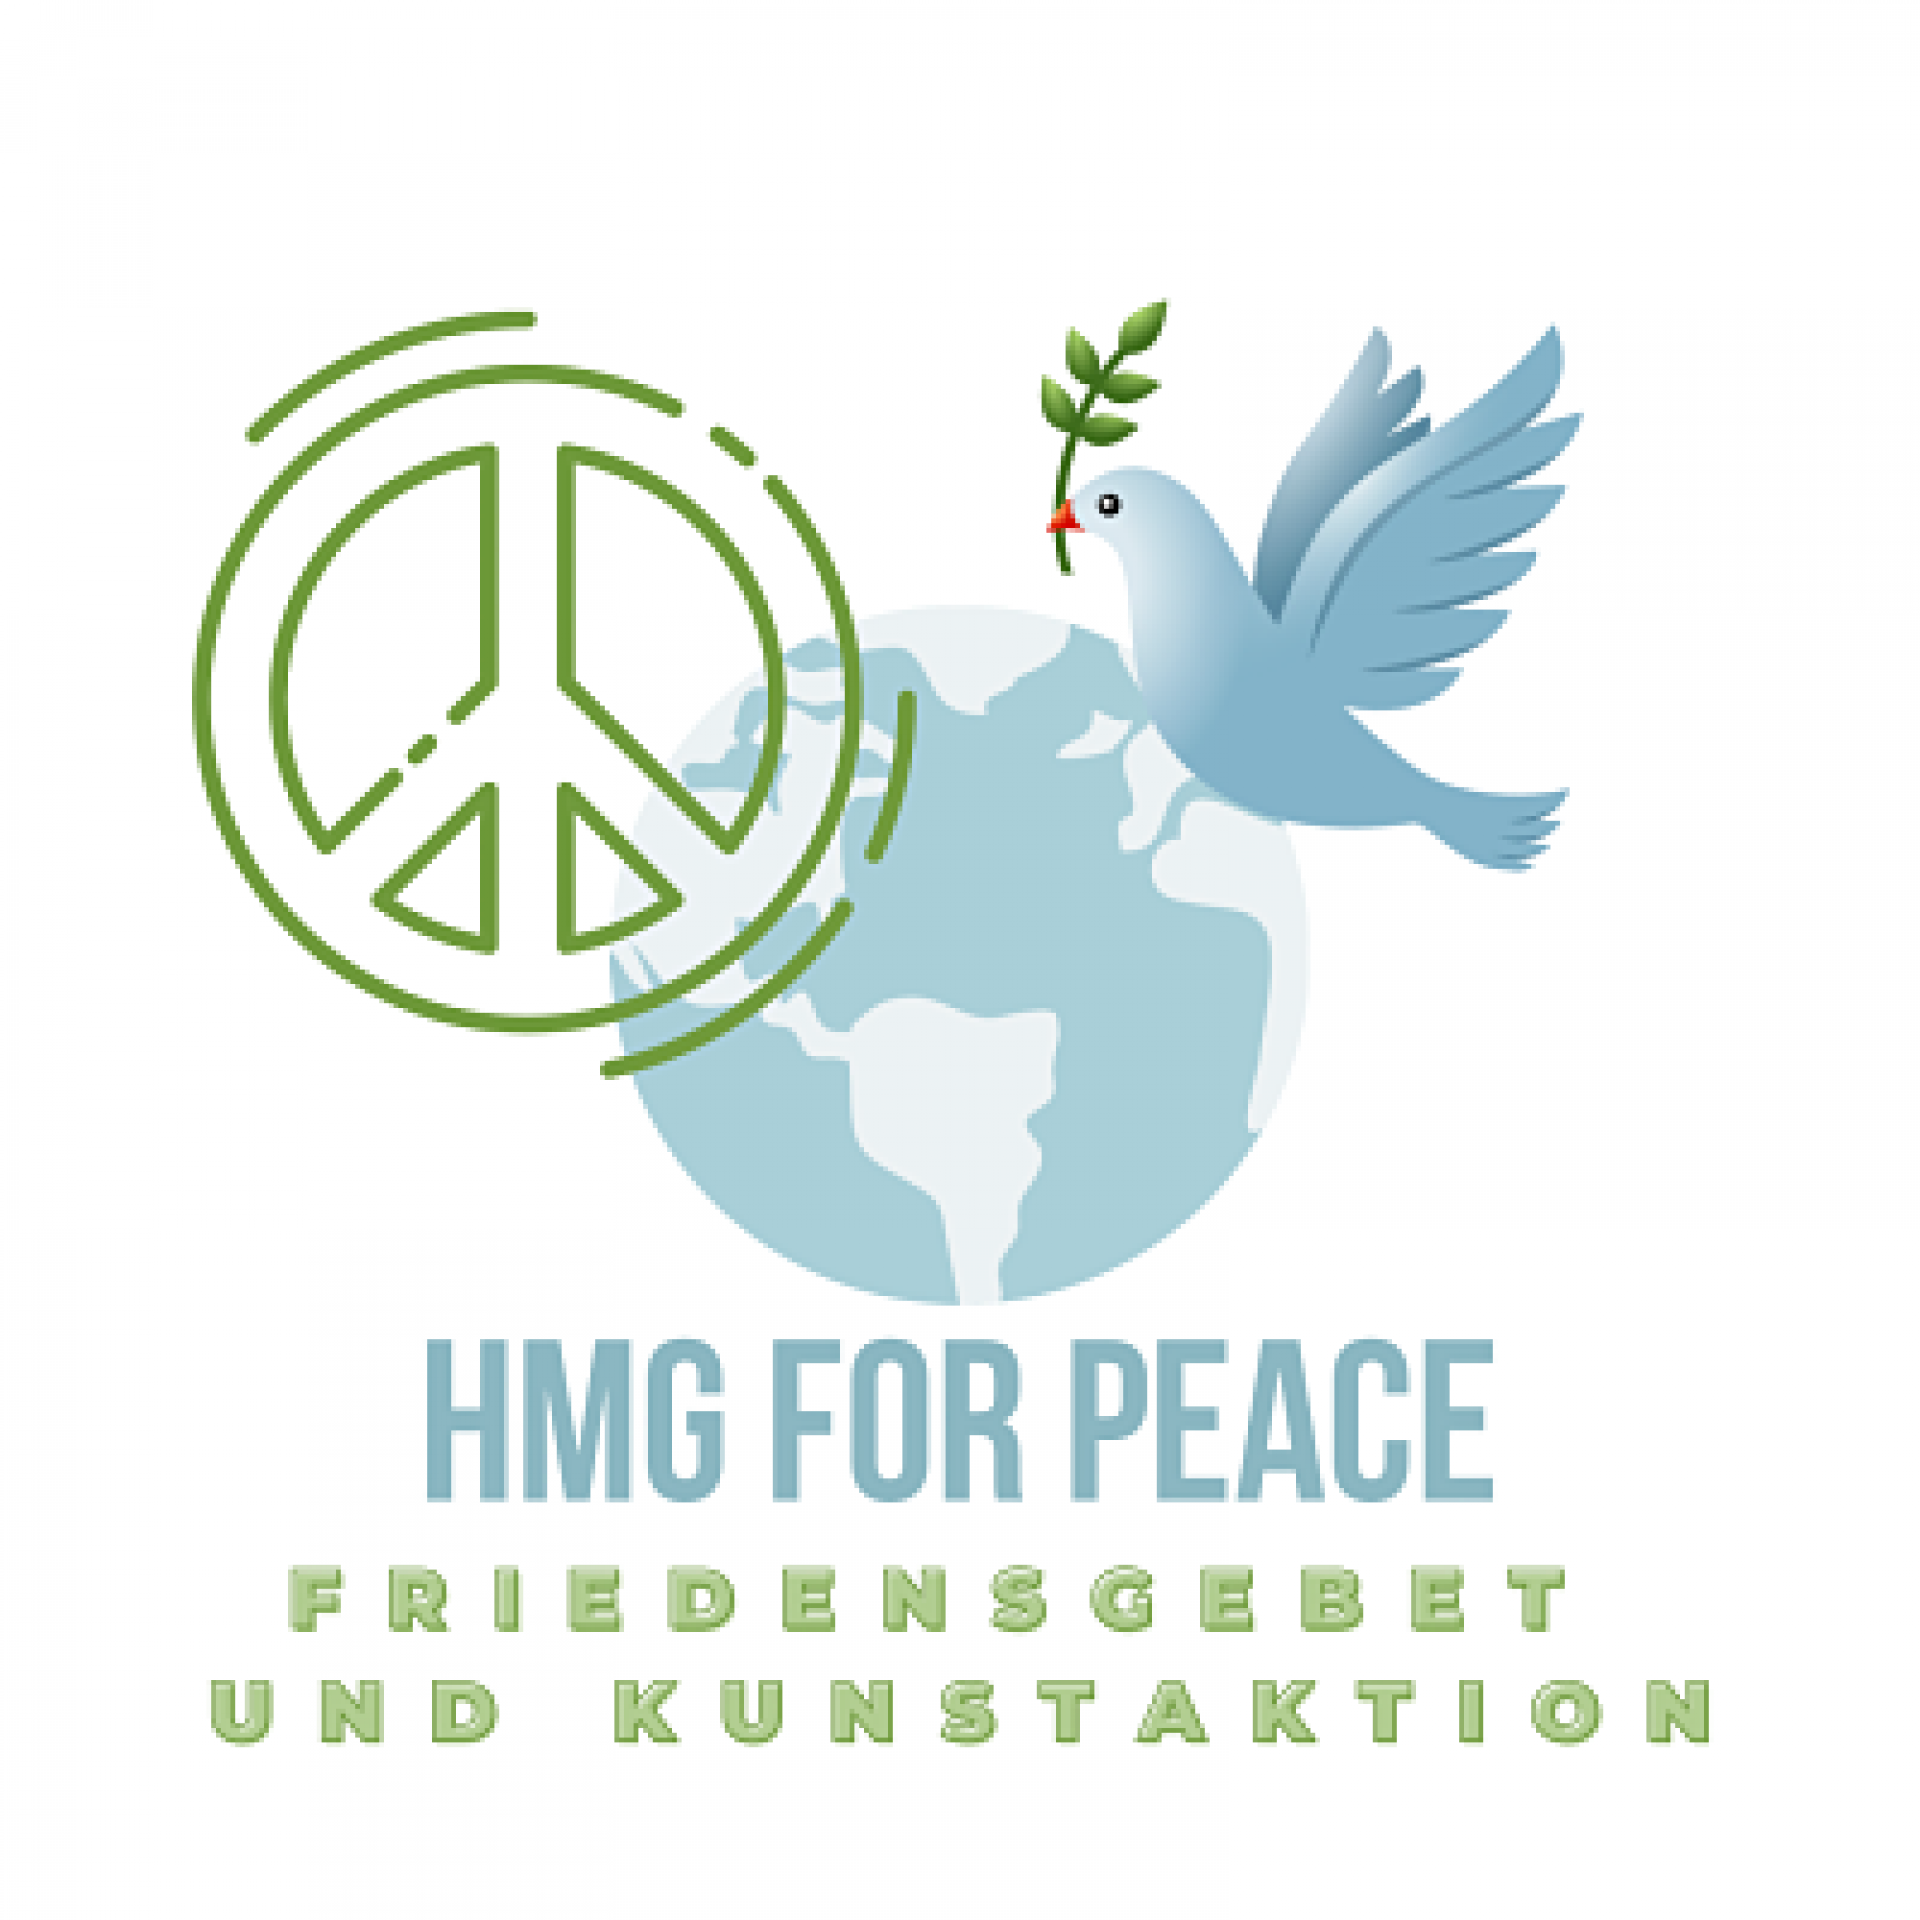 HMG for peace